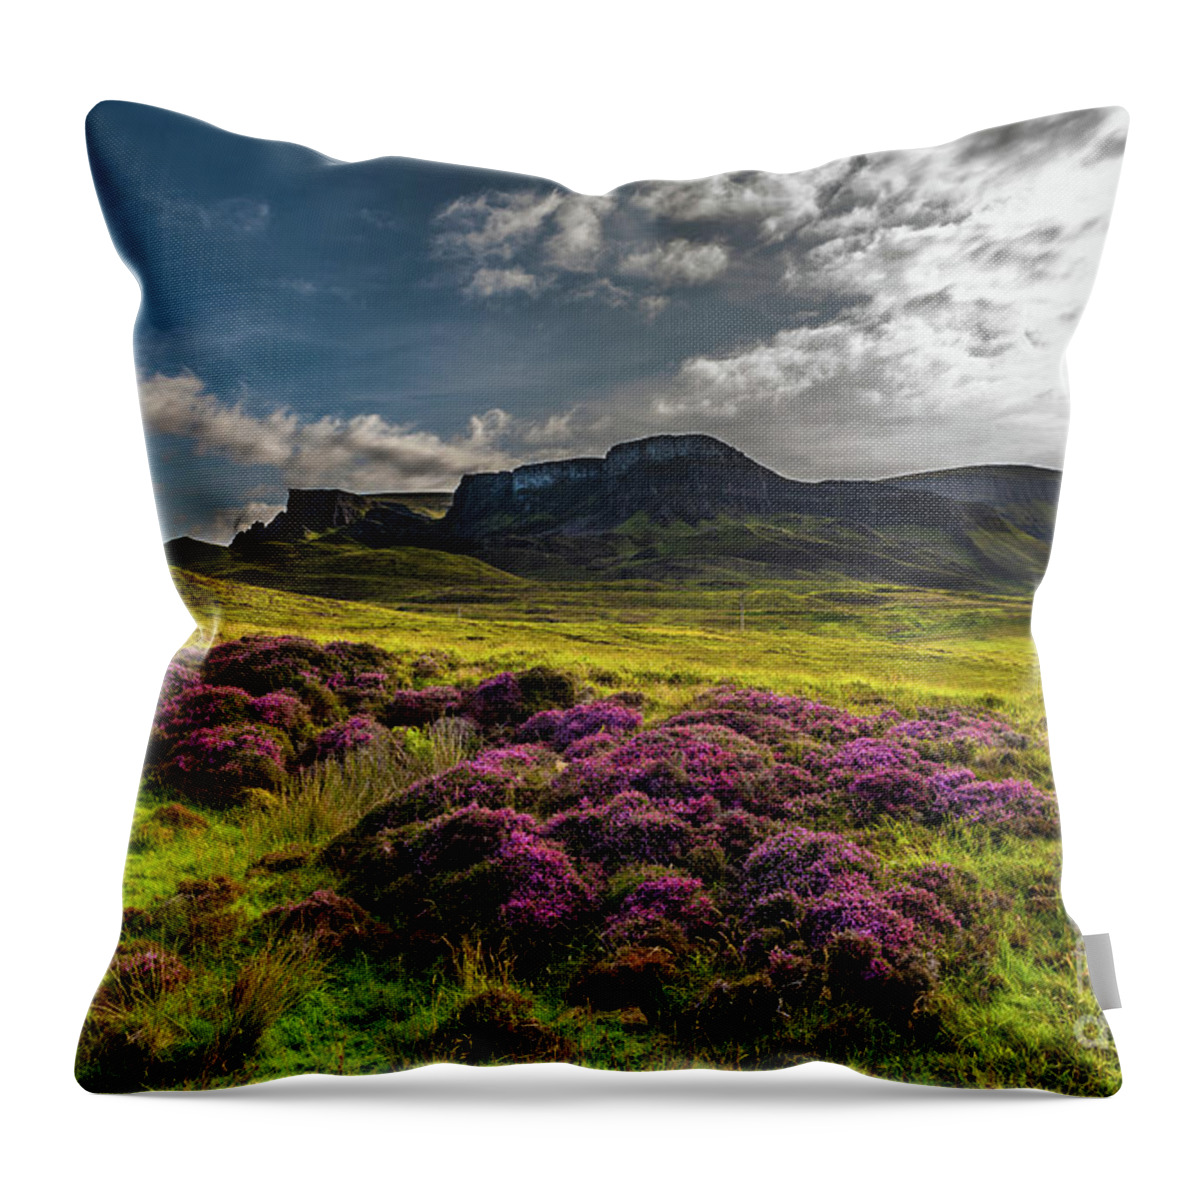 Abandoned Throw Pillow featuring the photograph Pasture With Blooming Heather In Scenic Mountain Landscape At The Old Man Of Storr Formation On The by Andreas Berthold